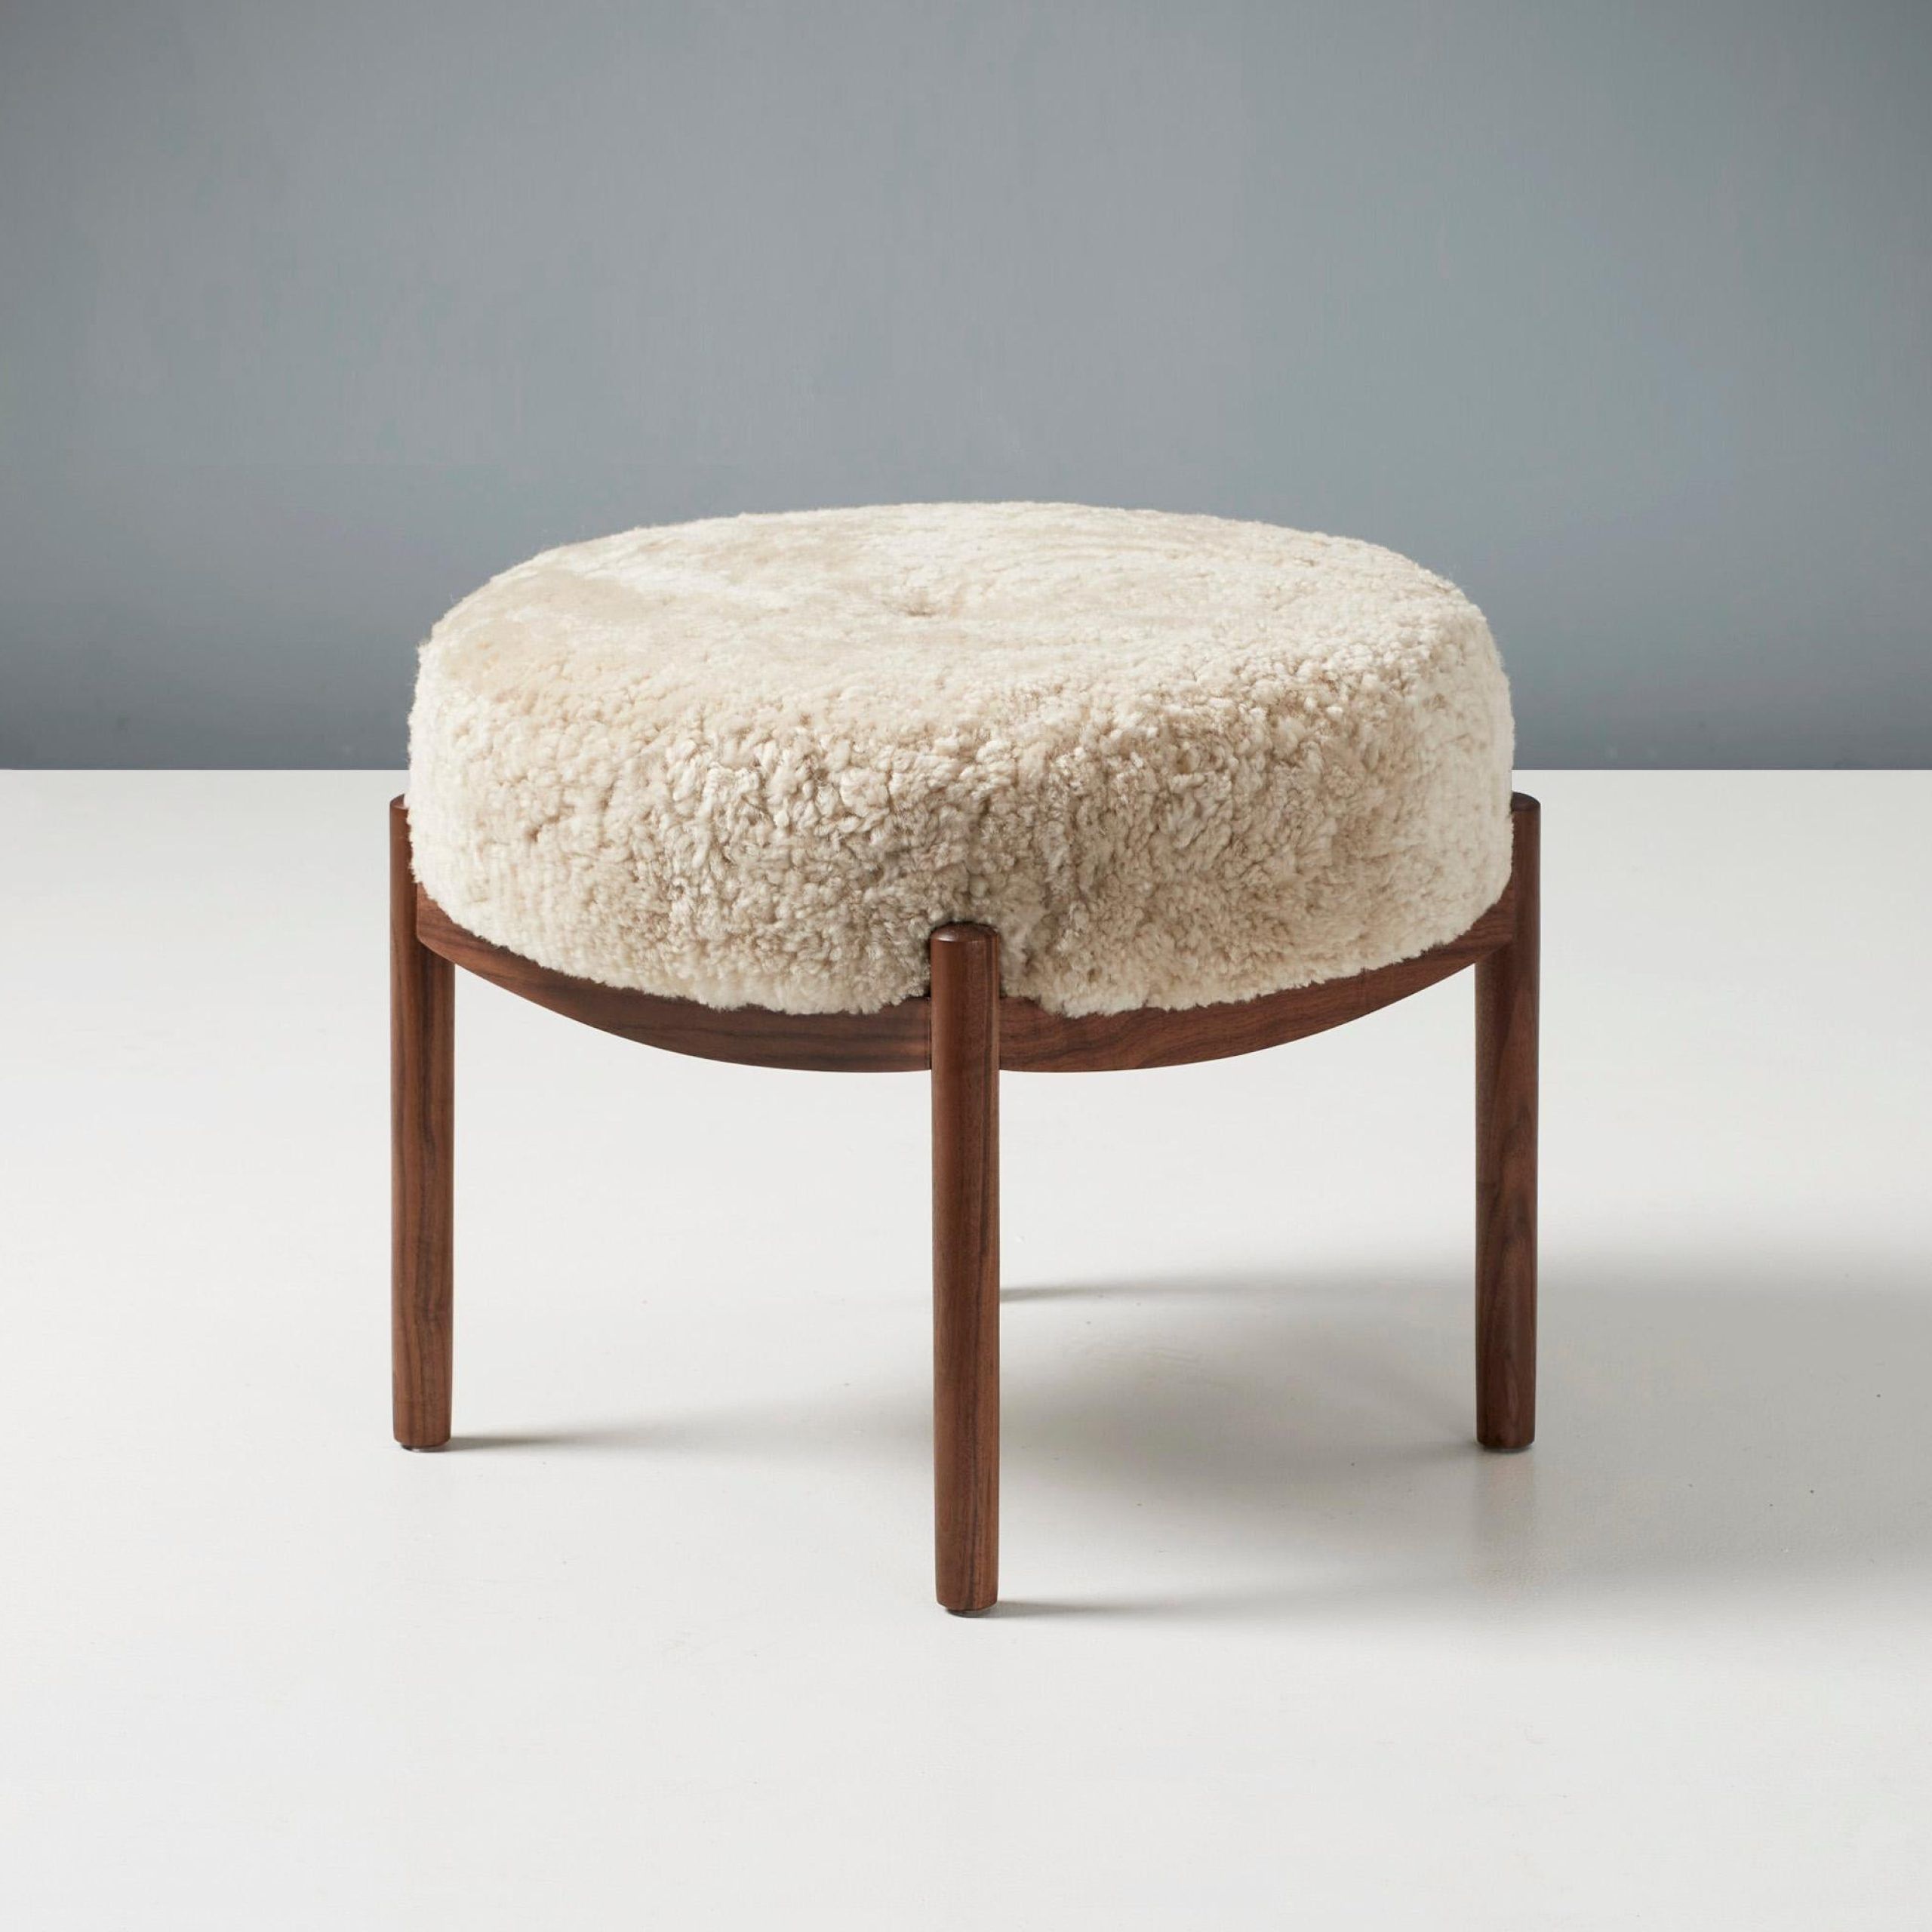 Favorite Custom Made Walnut And Shearling Round Ottoman For Sale At 1stdibs Regarding Satin Black Shearling Ottomans (View 10 of 10)